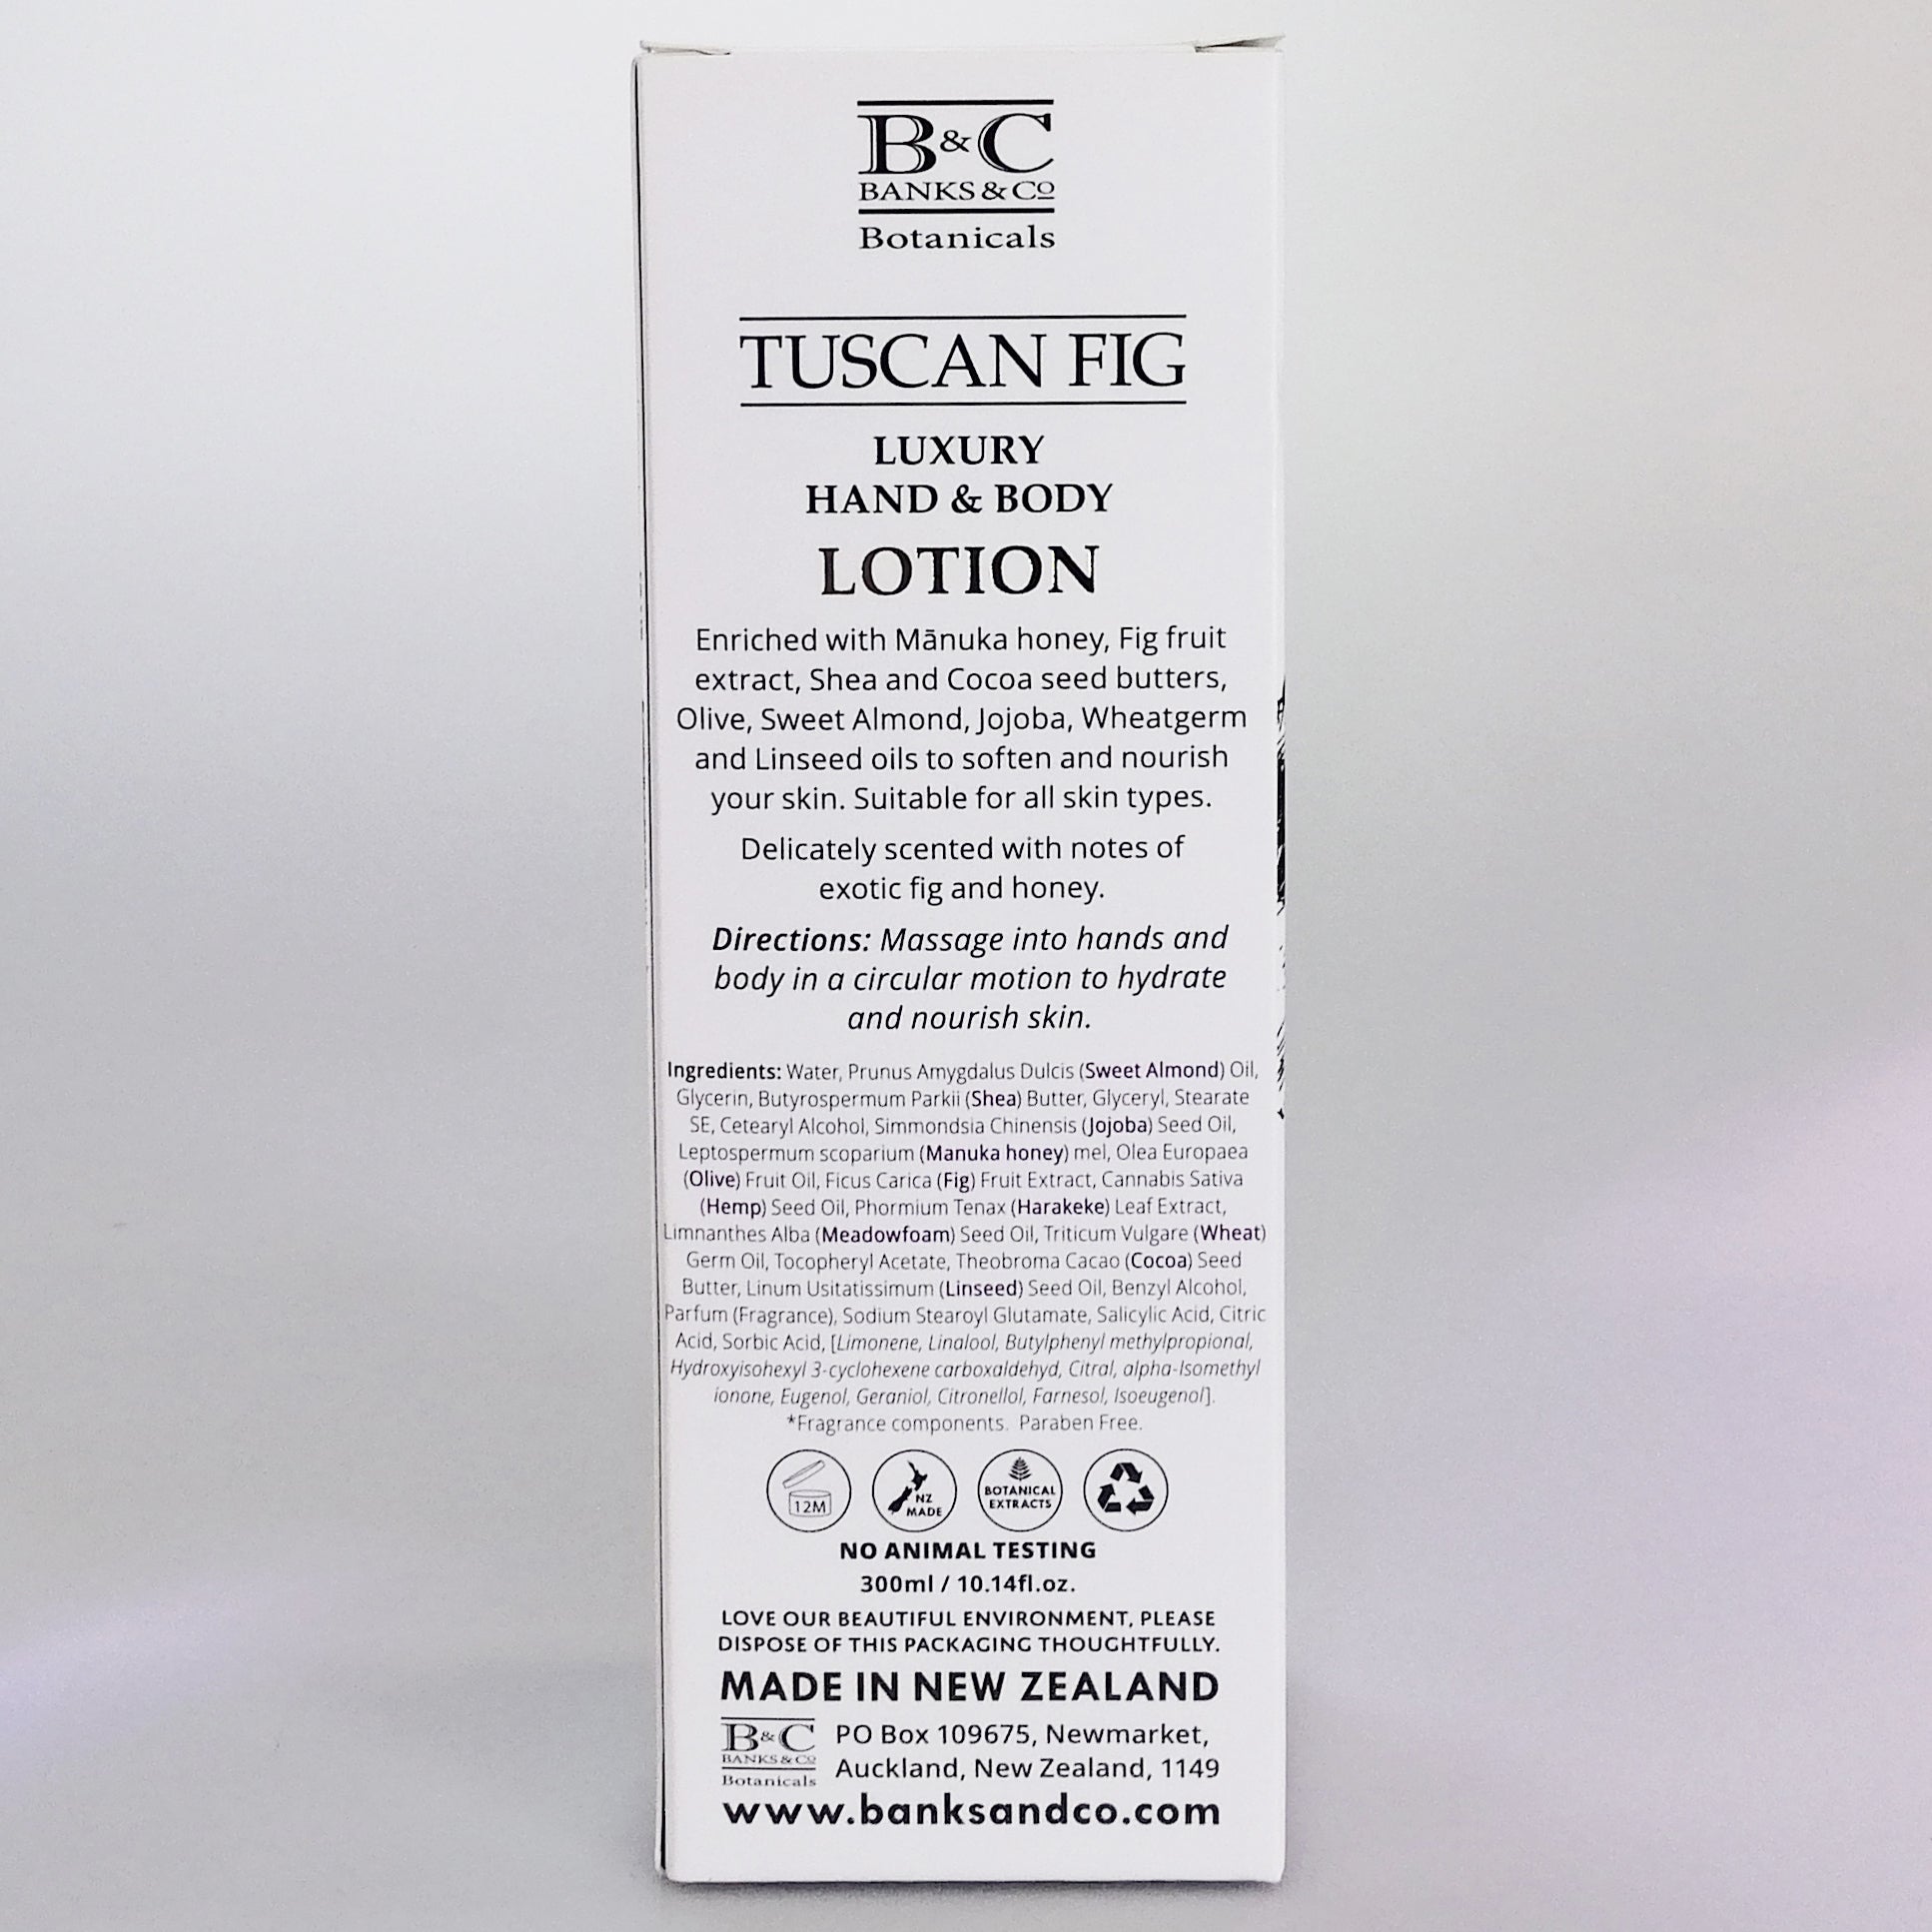 Banks & Co. Botanicals - Tuscan Fig - Hand & Body Lotion